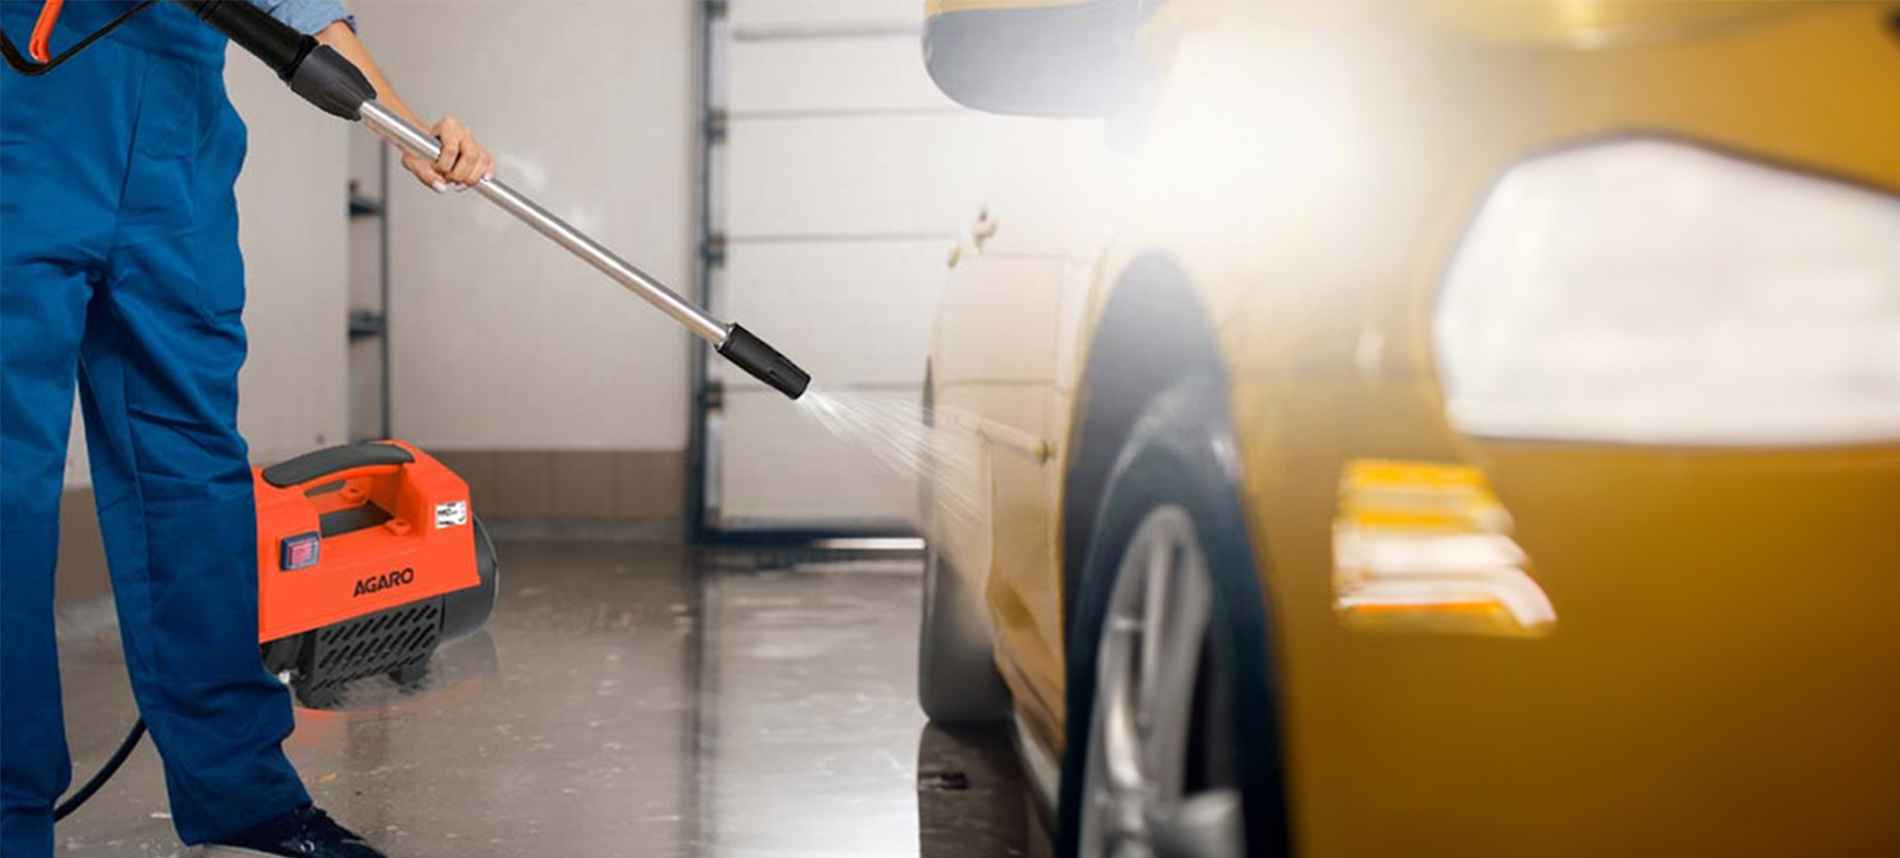 Mastering Car Pressure Washer: Your Ultimate Buying Guide – Agaro